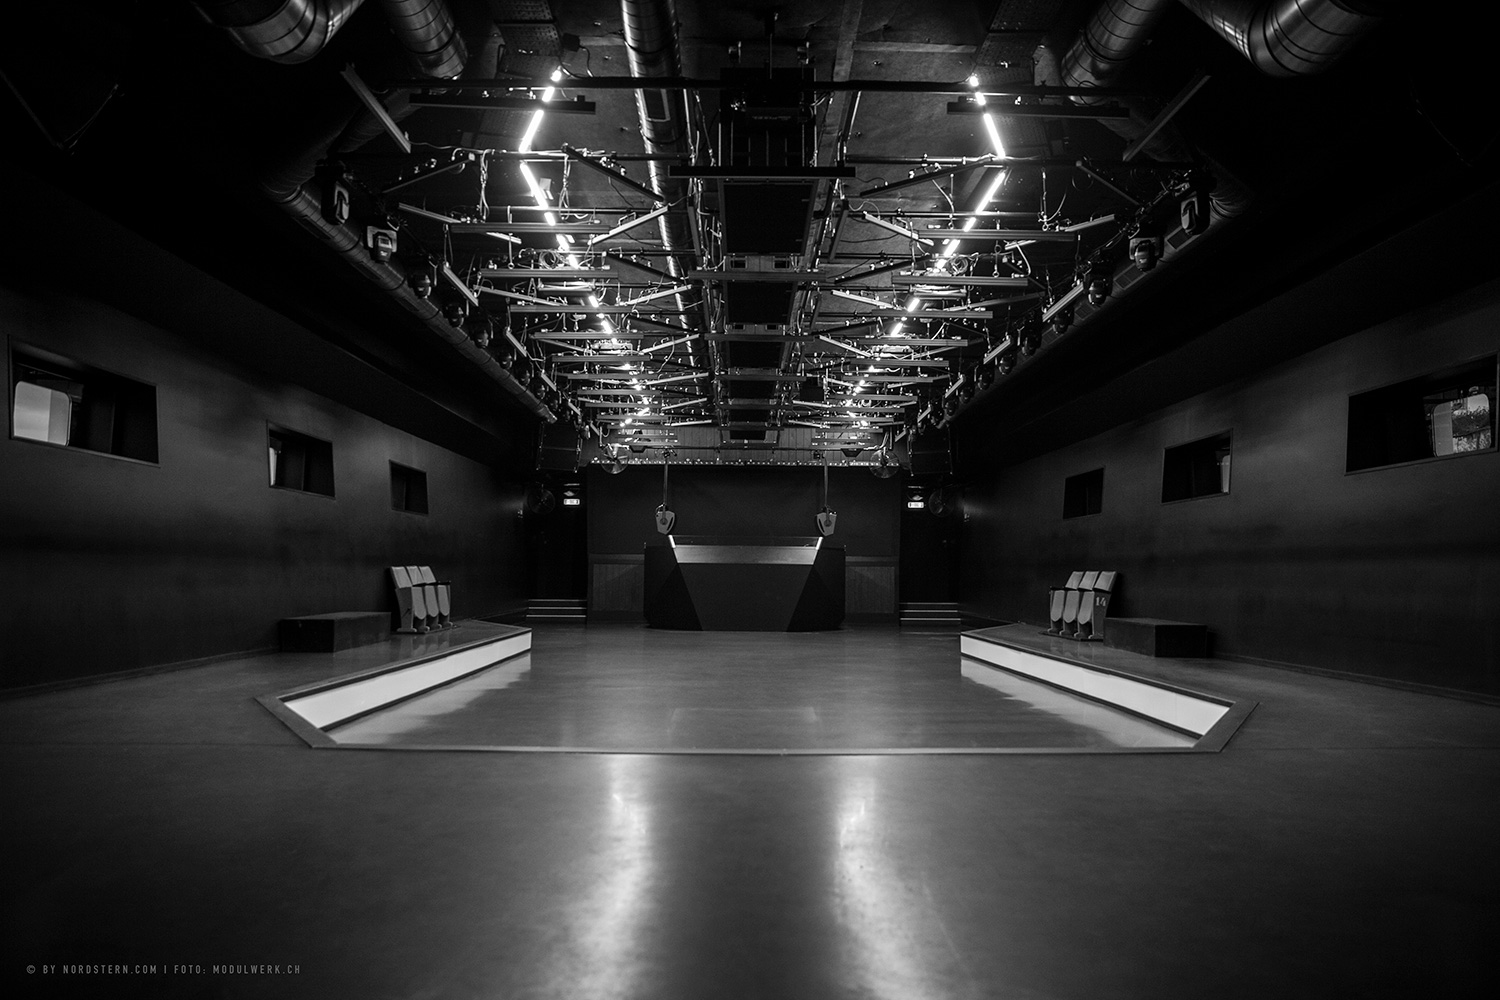 WSDG was in charge of the famous EDM nightclub Nordstern in Basel, Switzerland sound isolation, acoustics, and audio design inside the nightclub. Nightclub inside black and white DJ Booth.